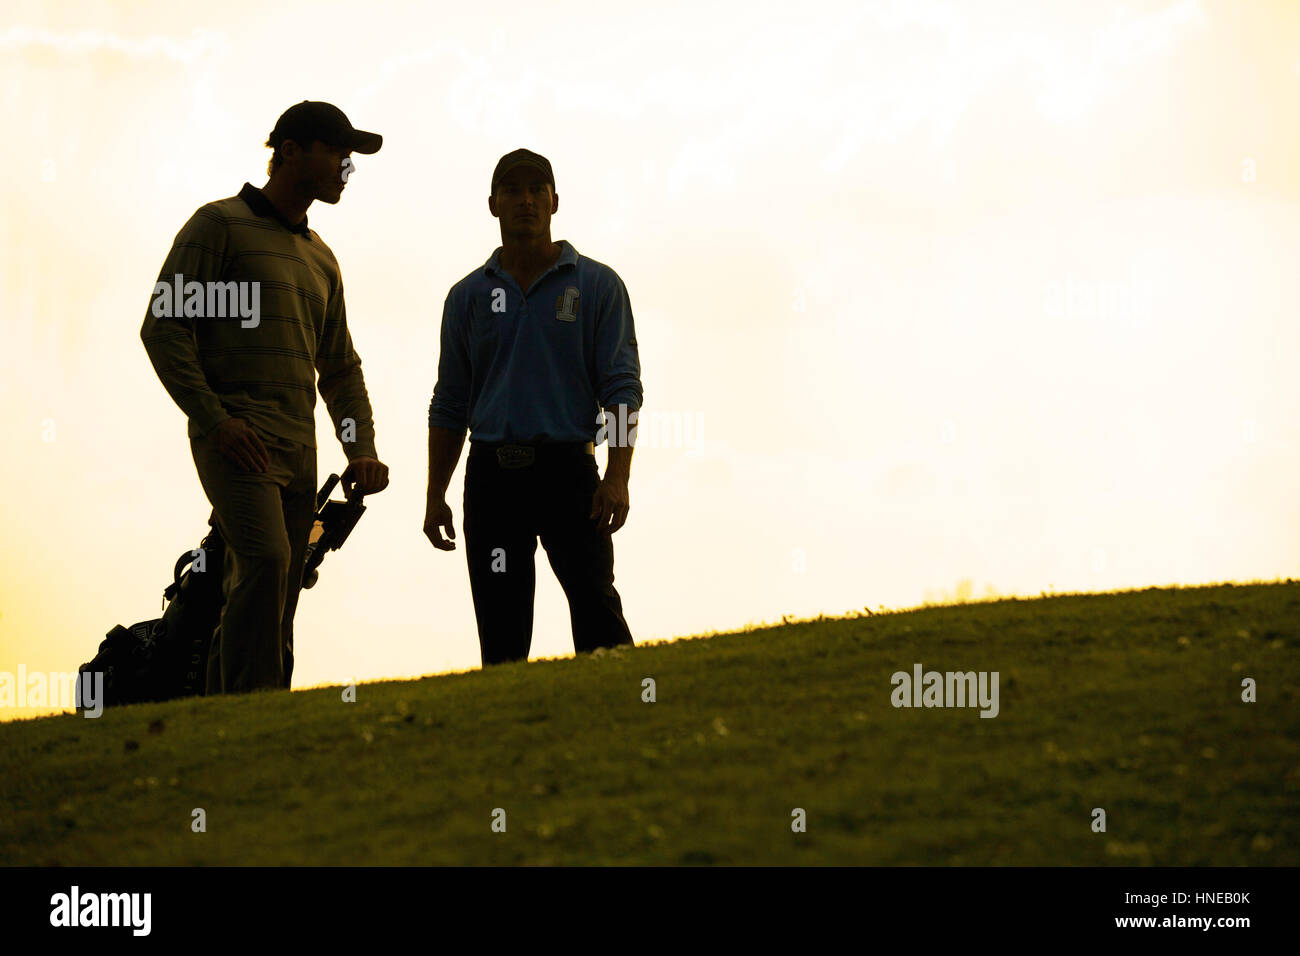 Silhouette of young men standing in golf course with trolley Stock Photo